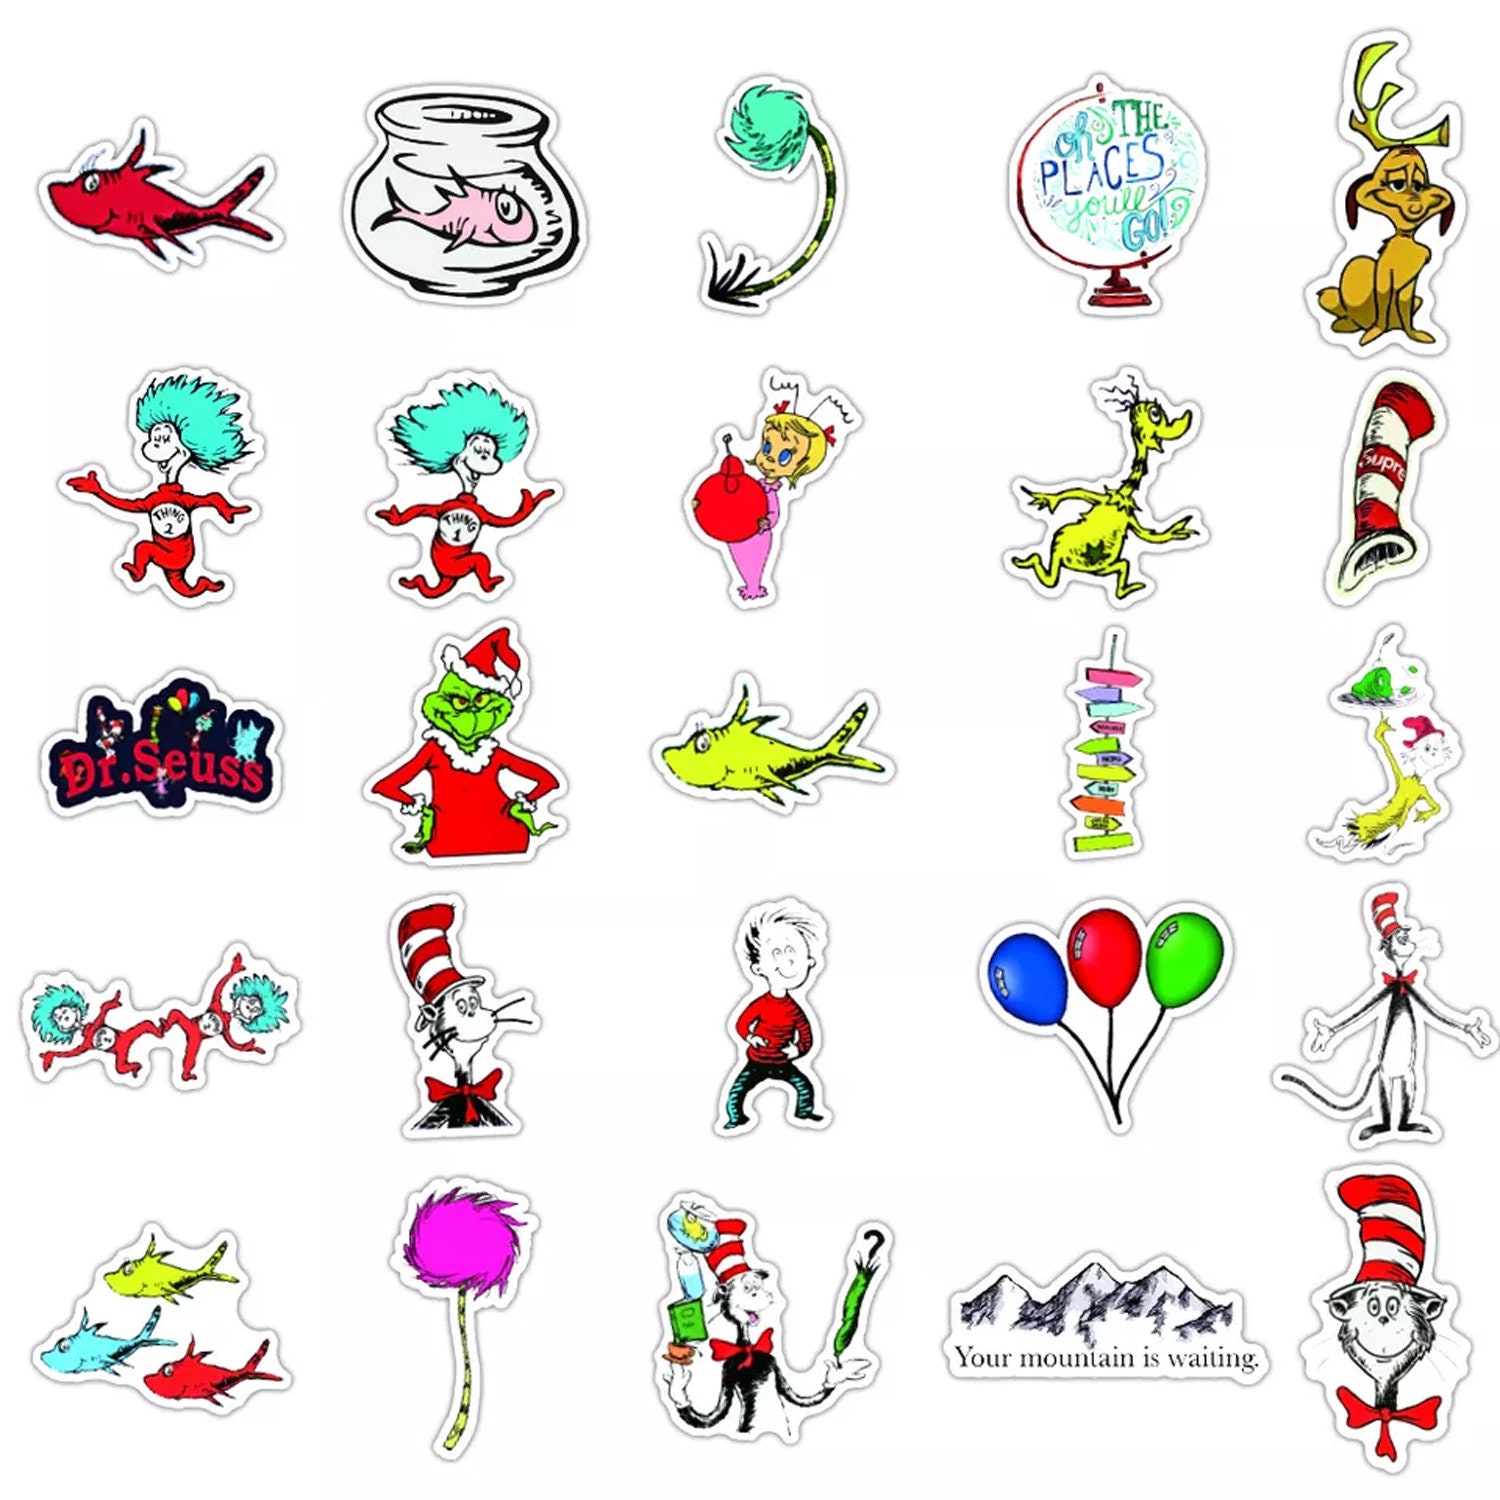 Dr. Seuss Sticker Pack - Culture of Gaming